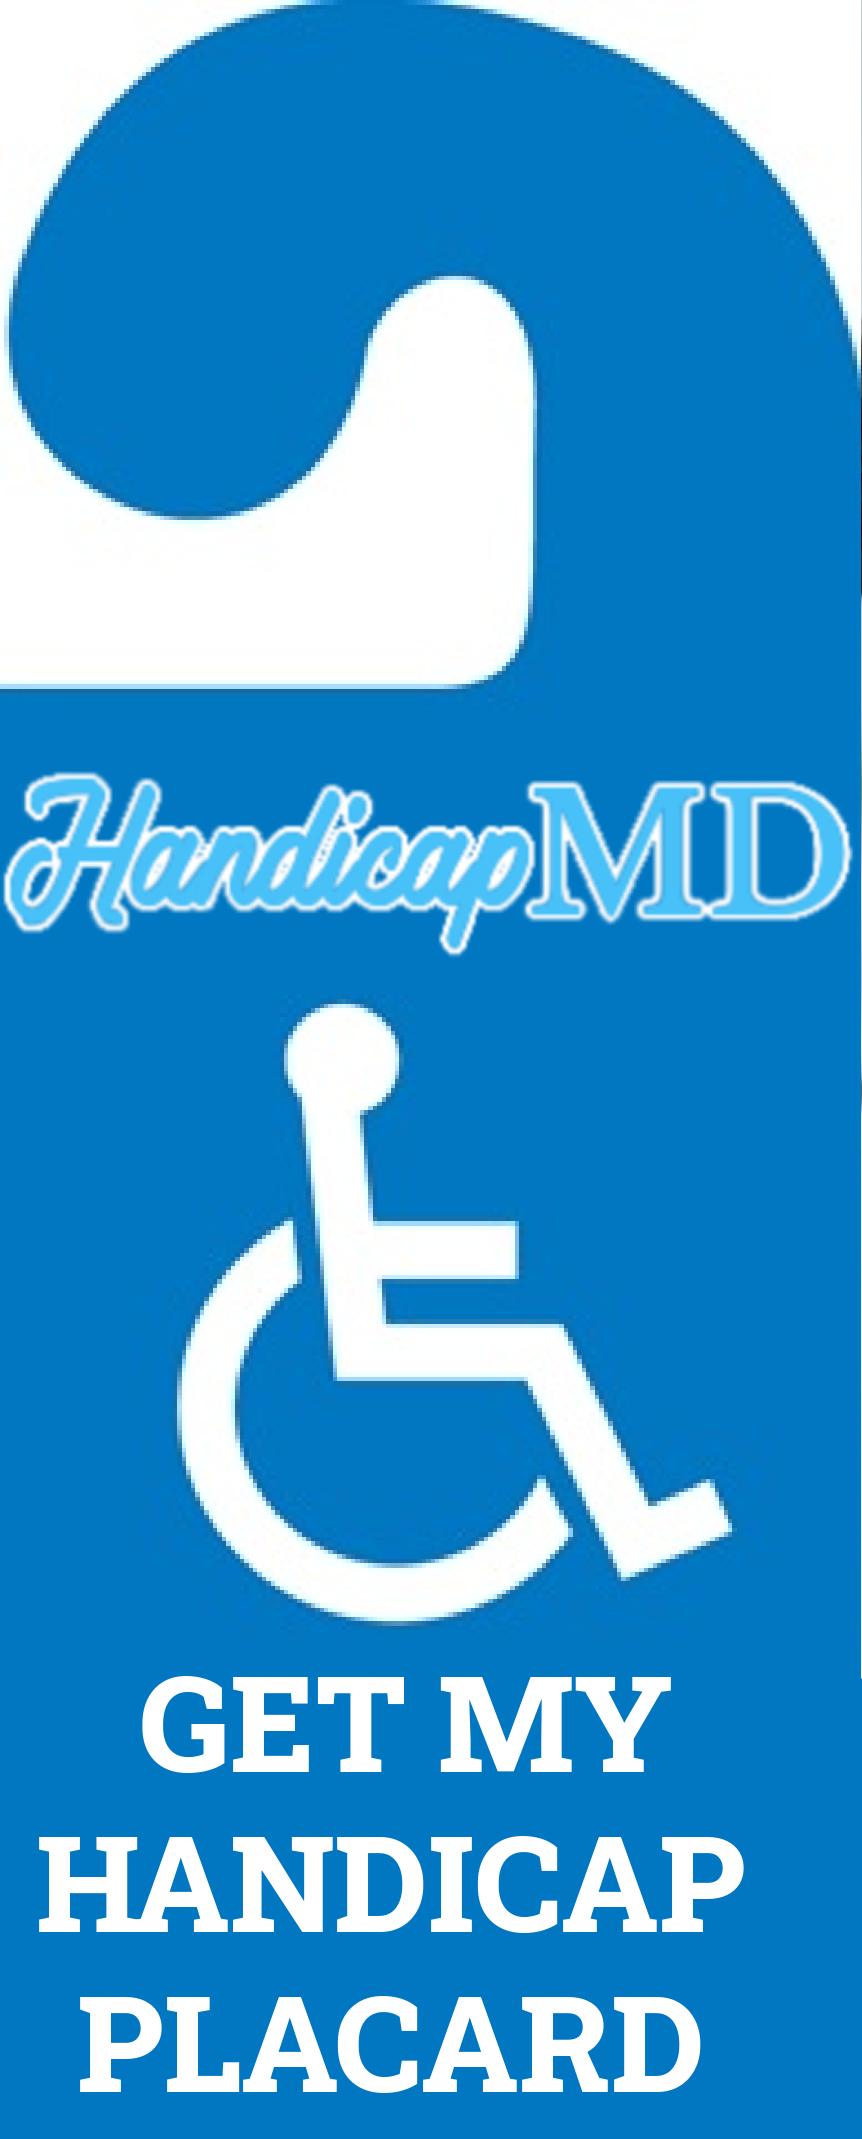 Handicap Placard Violations and Penalties in New Hampshire: What You Need to Know